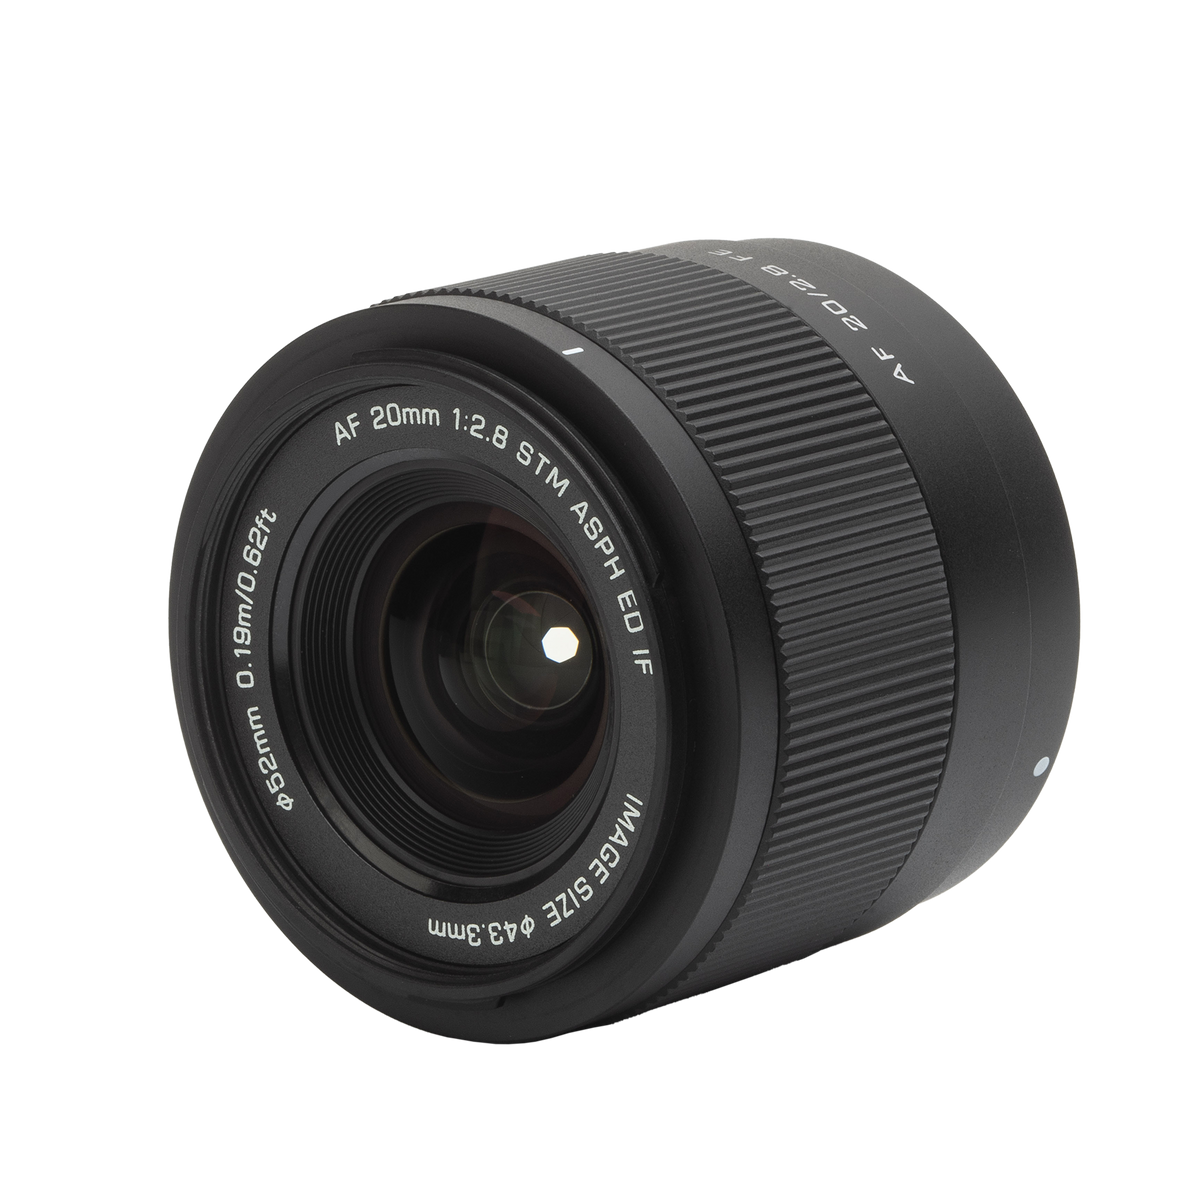 Lens af 20 mm f/2.8 fe with sony e-mount – Rollei